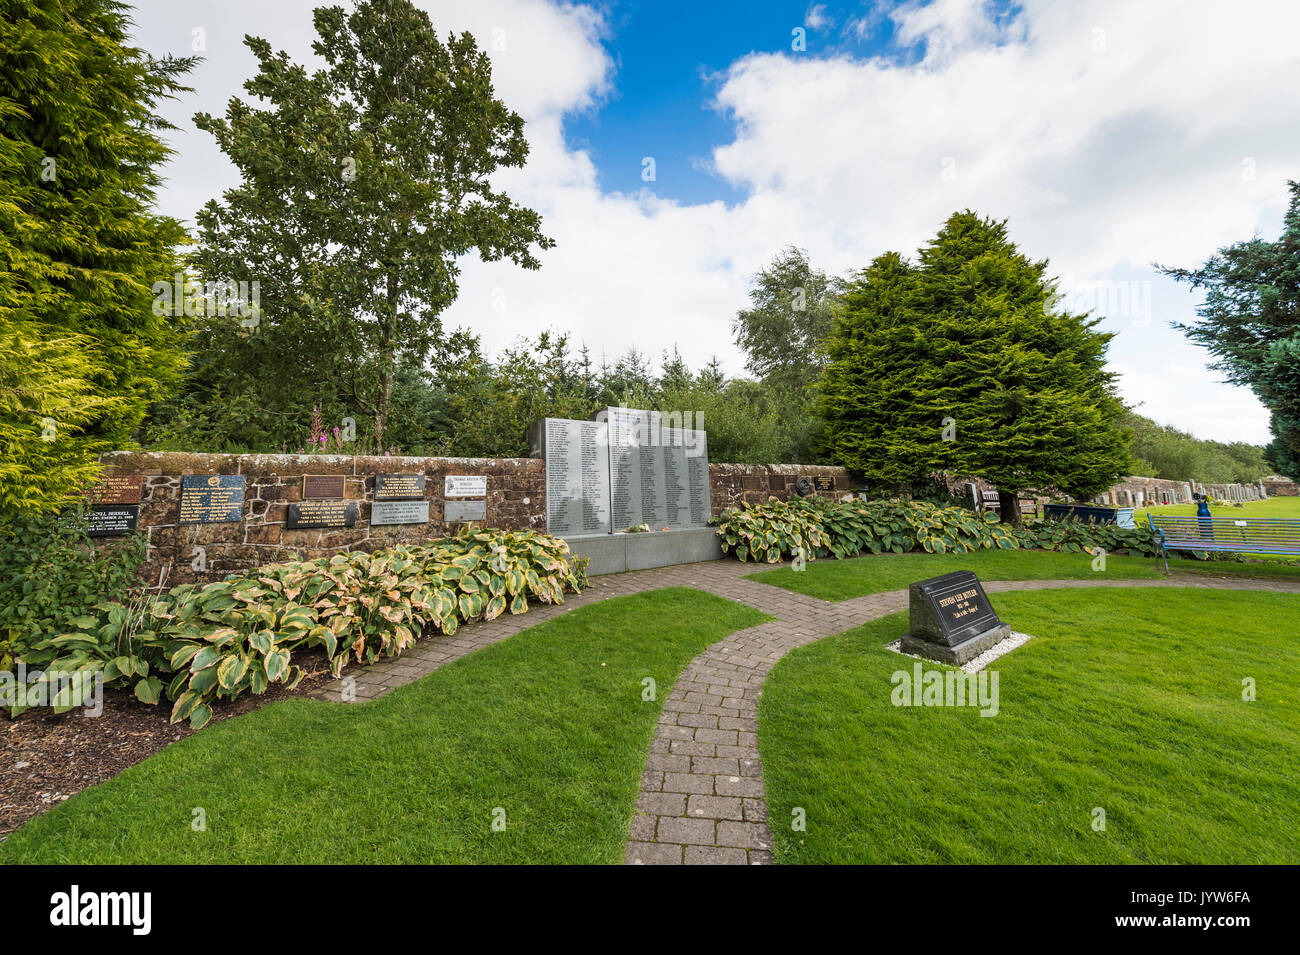 Lockerbie, Scotland, UK - August 19, 2017: The garden of remembrance for the victims of the Lockerbie air disaster in Dryfesdale cemetery, Lockerbie.  Stock Photo